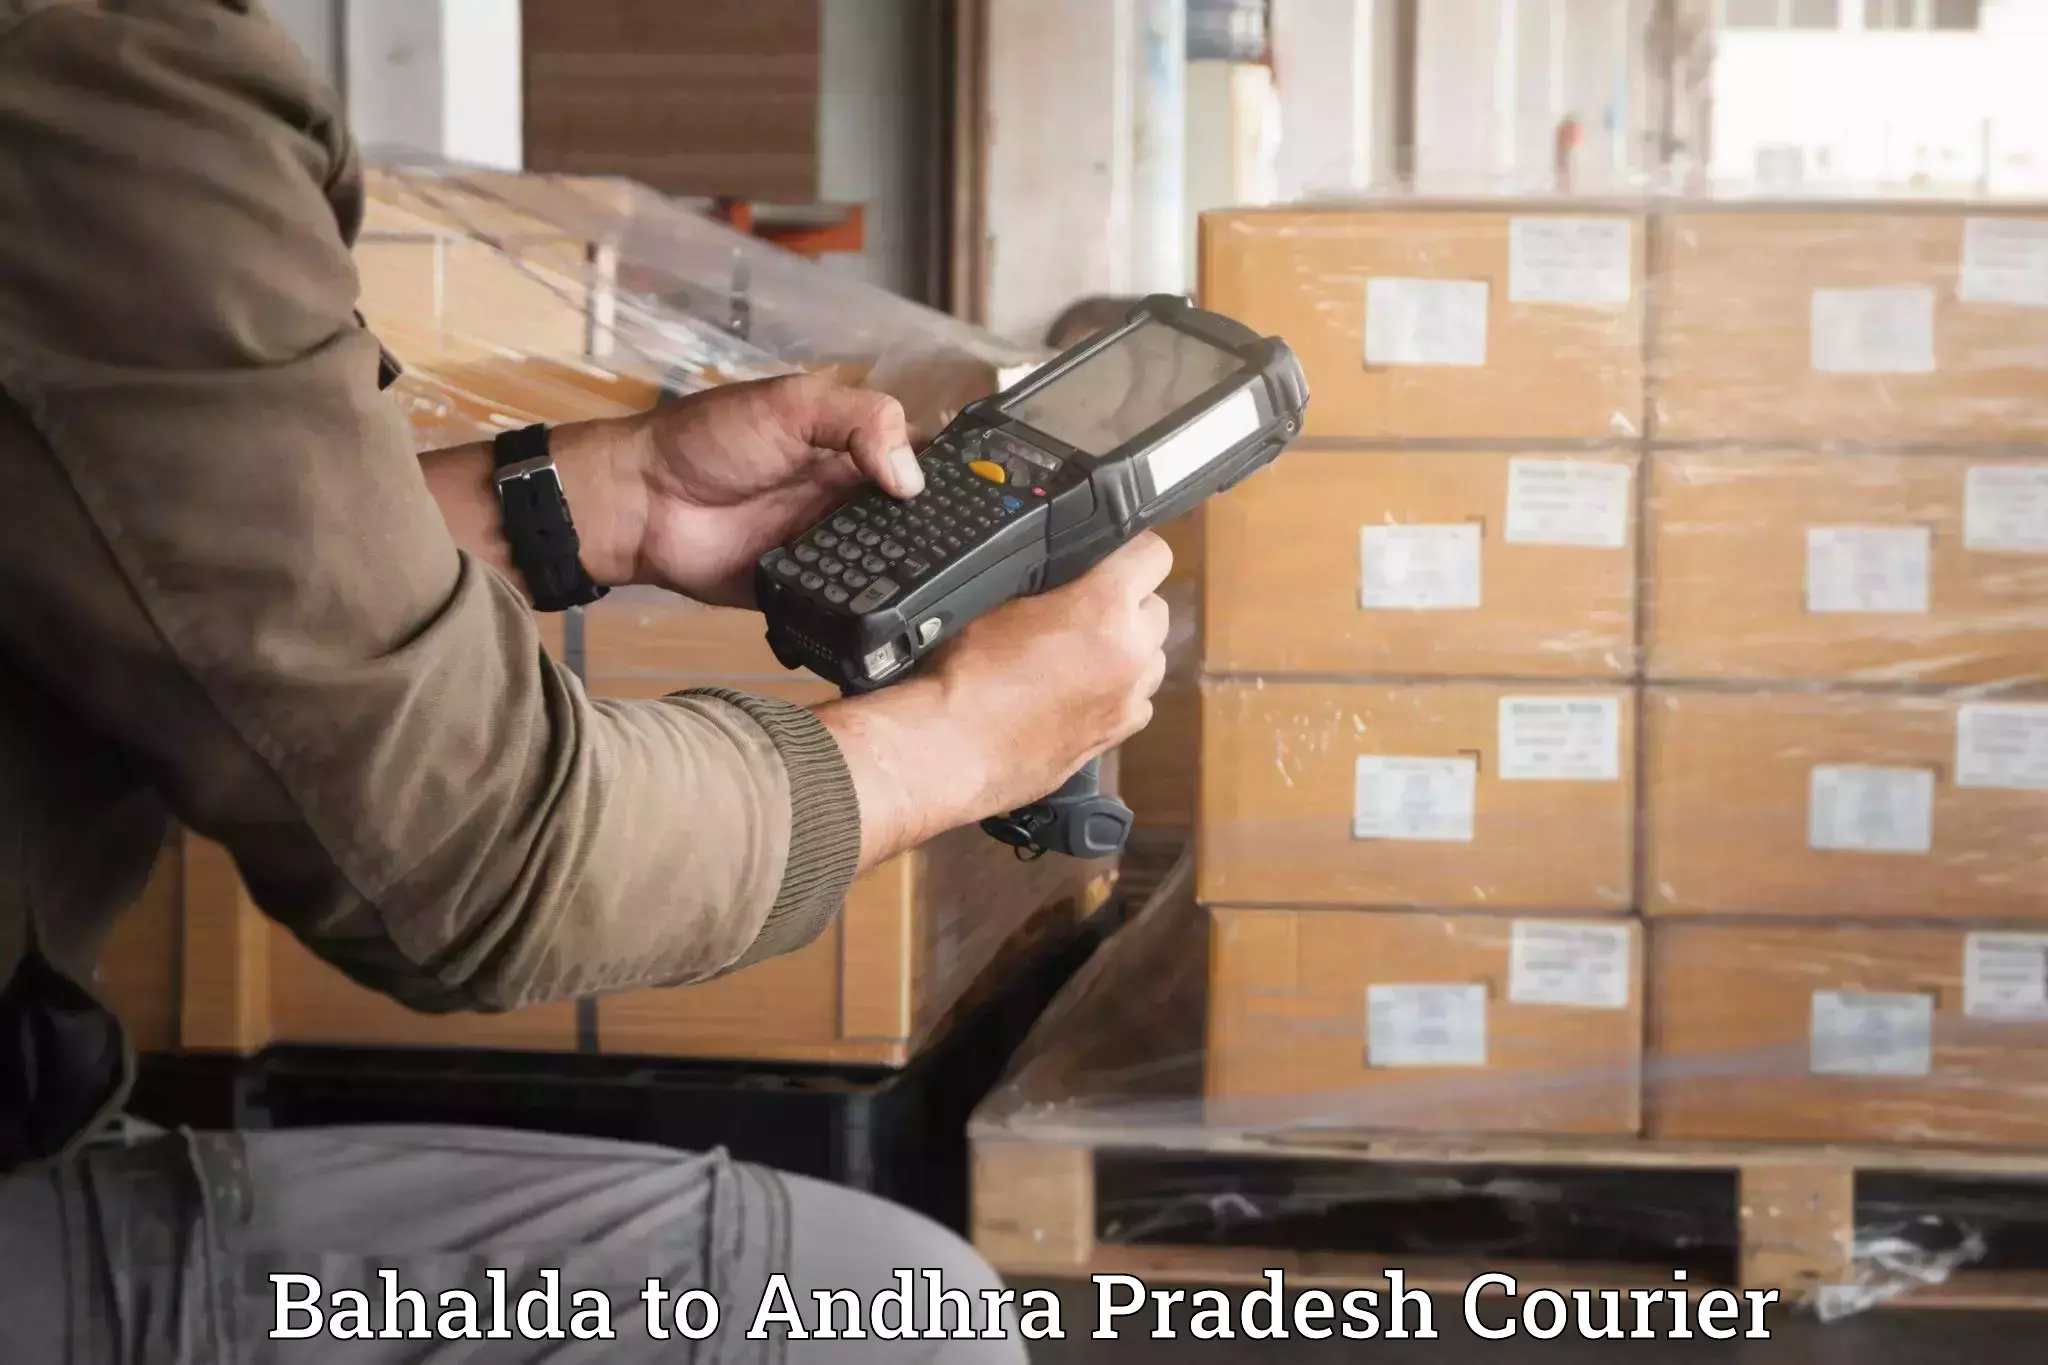 Professional movers and packers Bahalda to Gullapalli